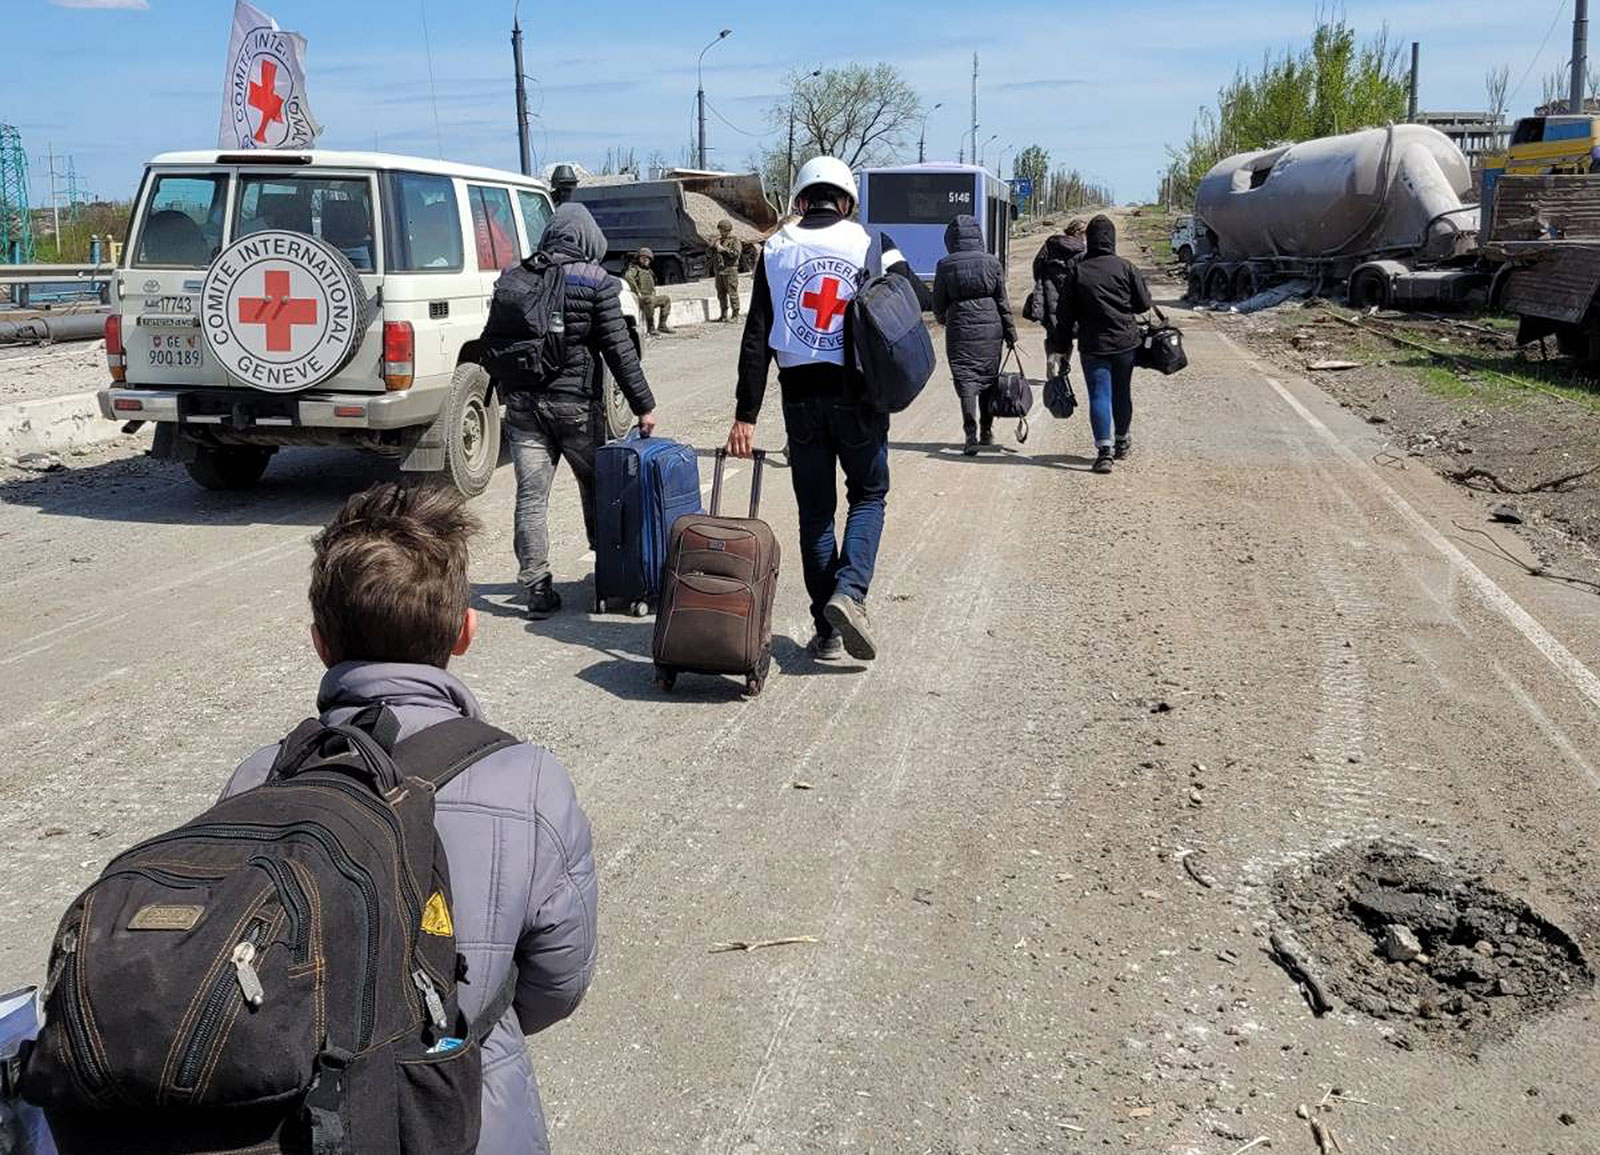 The International Committee of the Red Cross team participates in an ongoing operation to facilitate the safe passage of civilians out of the Azovstal plant and Mariupol on May 4.